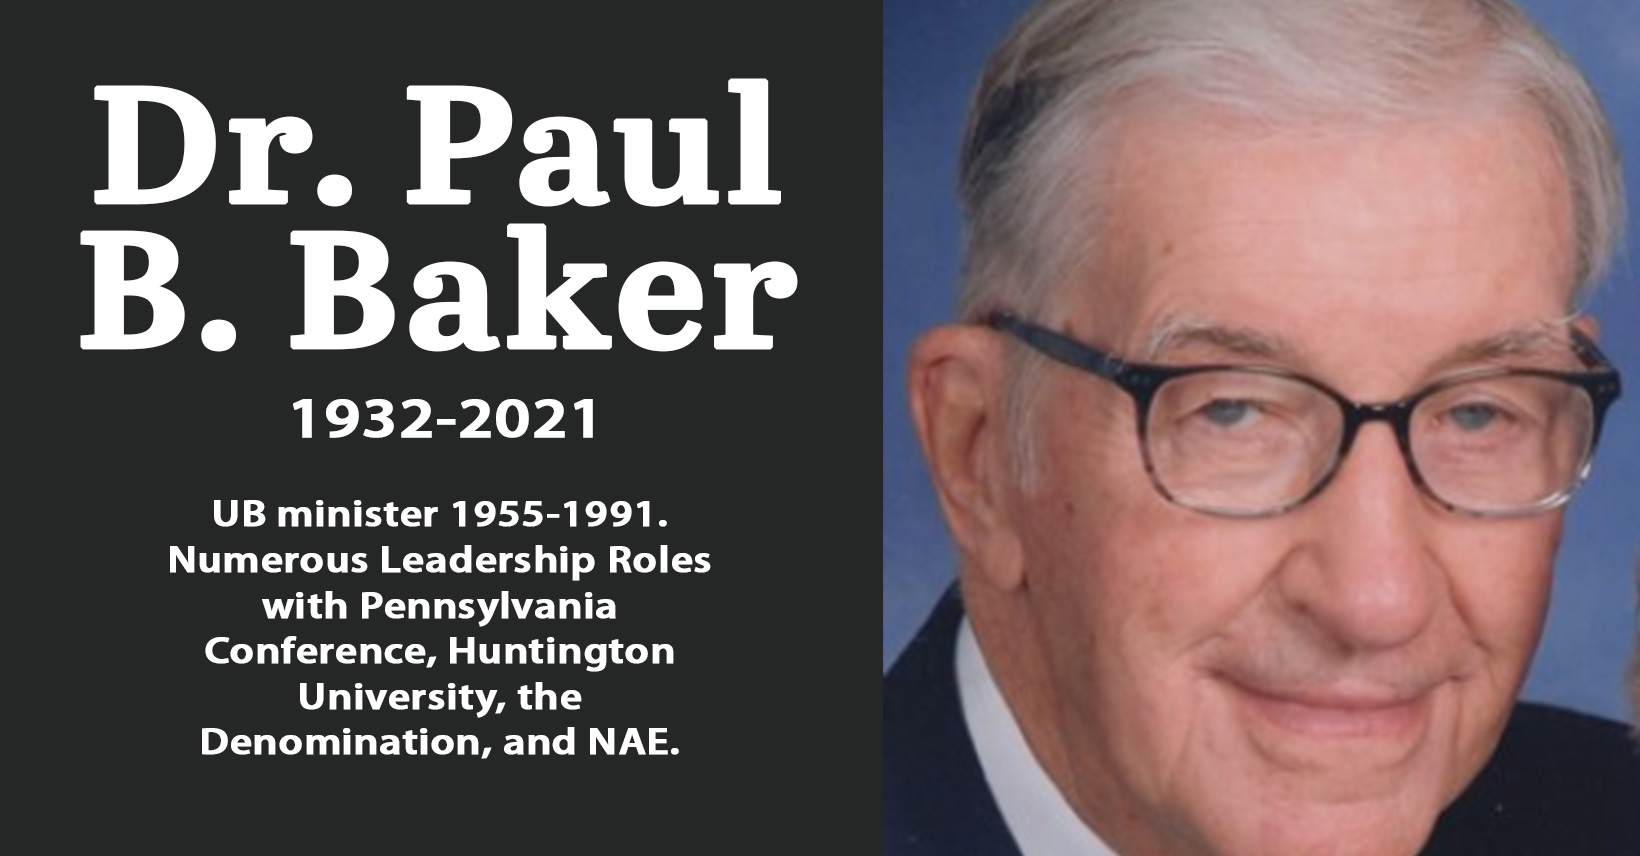 Obituary Dr. Paul B. Baker, Longtime UB Pastor and Leader UBCentral